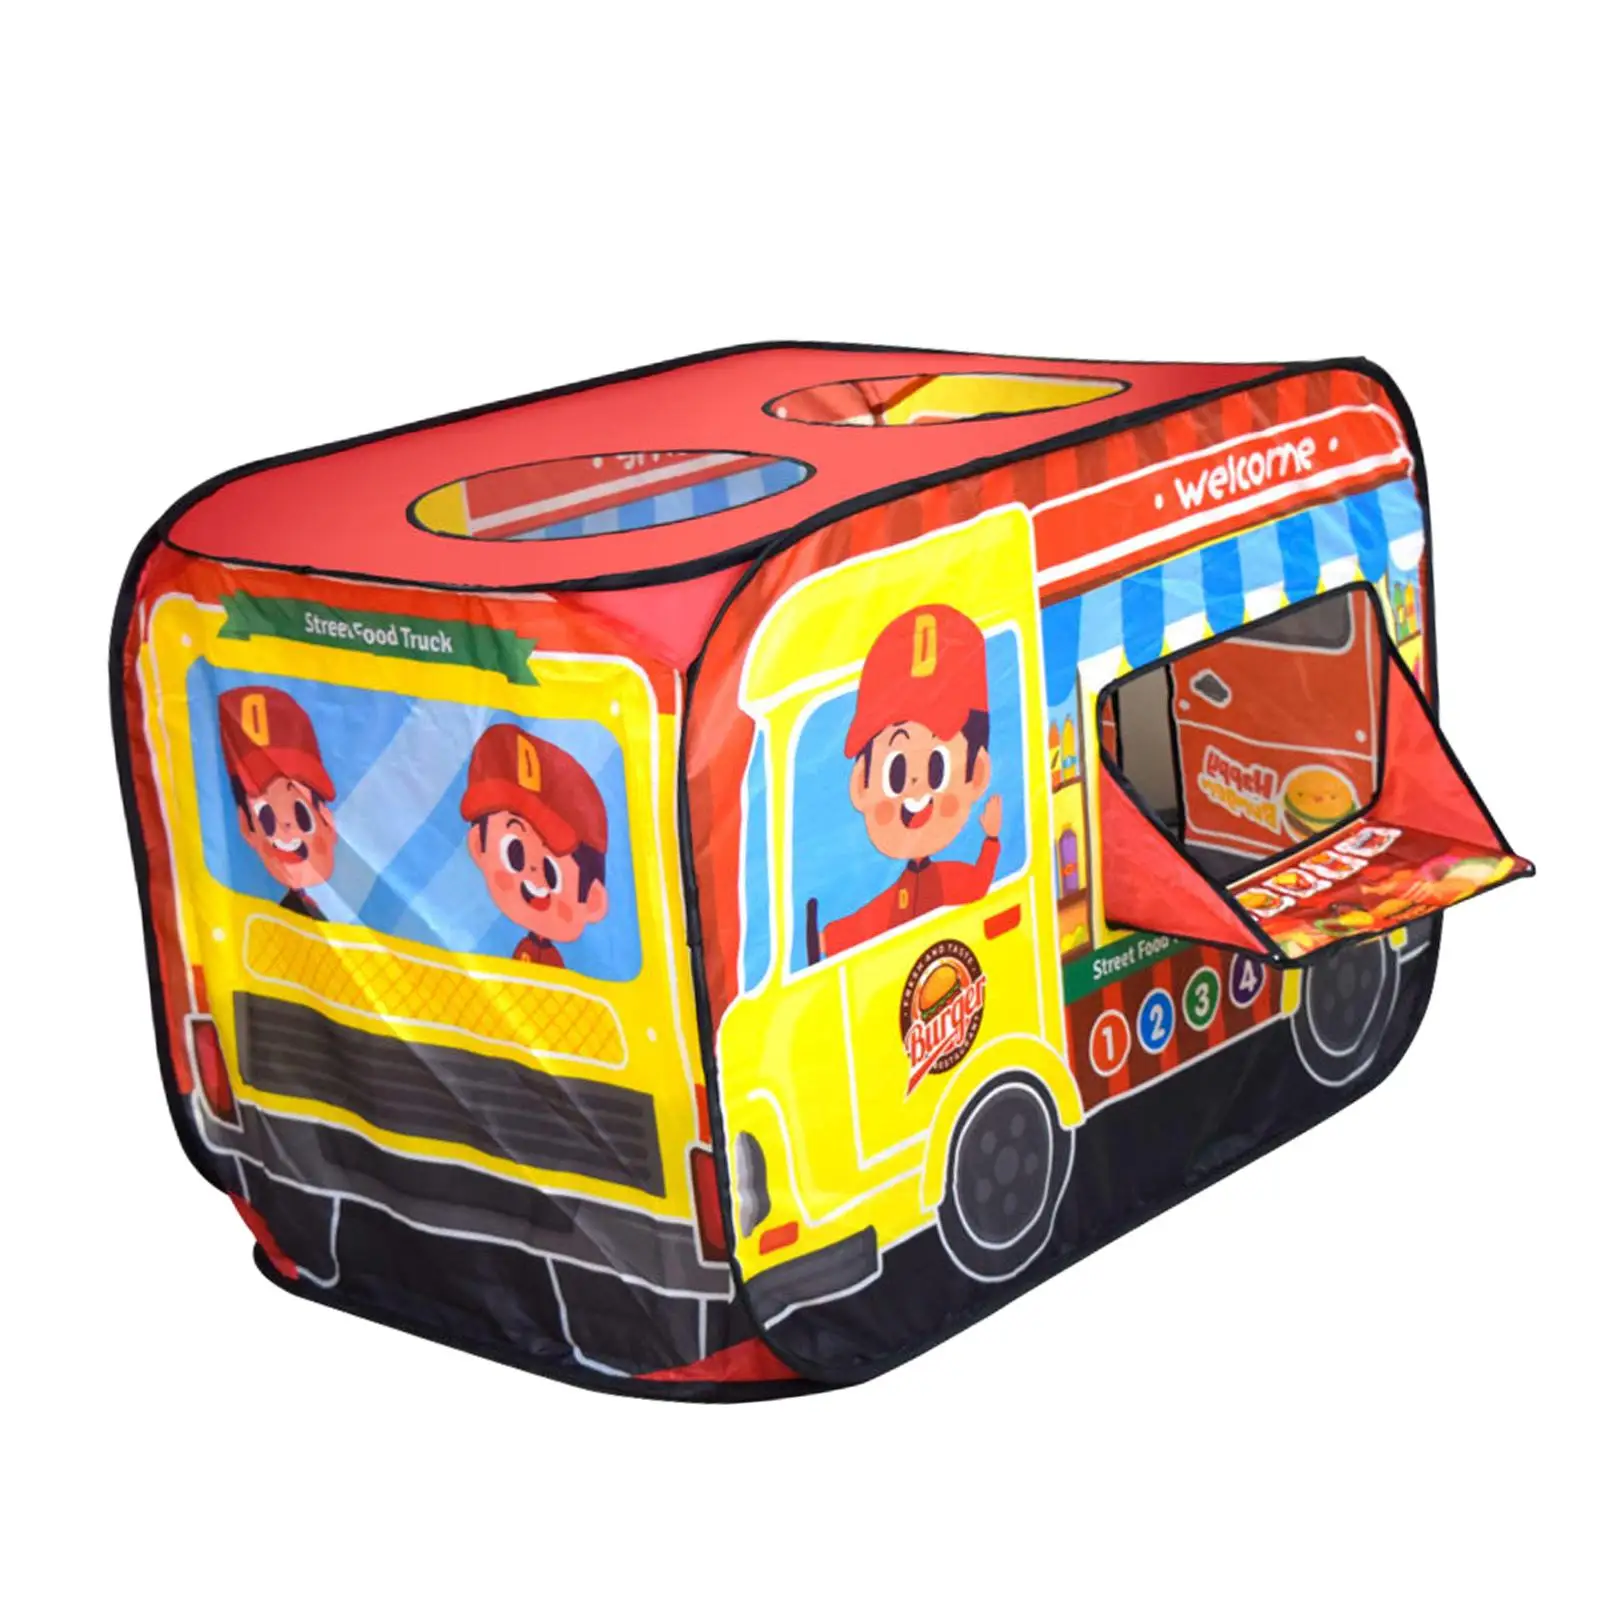 Kids Popup Tent Gift Portable Easy to Use Burger Cart Children Playhouse Tent for Games Indoor Outdoor Home Yard Children